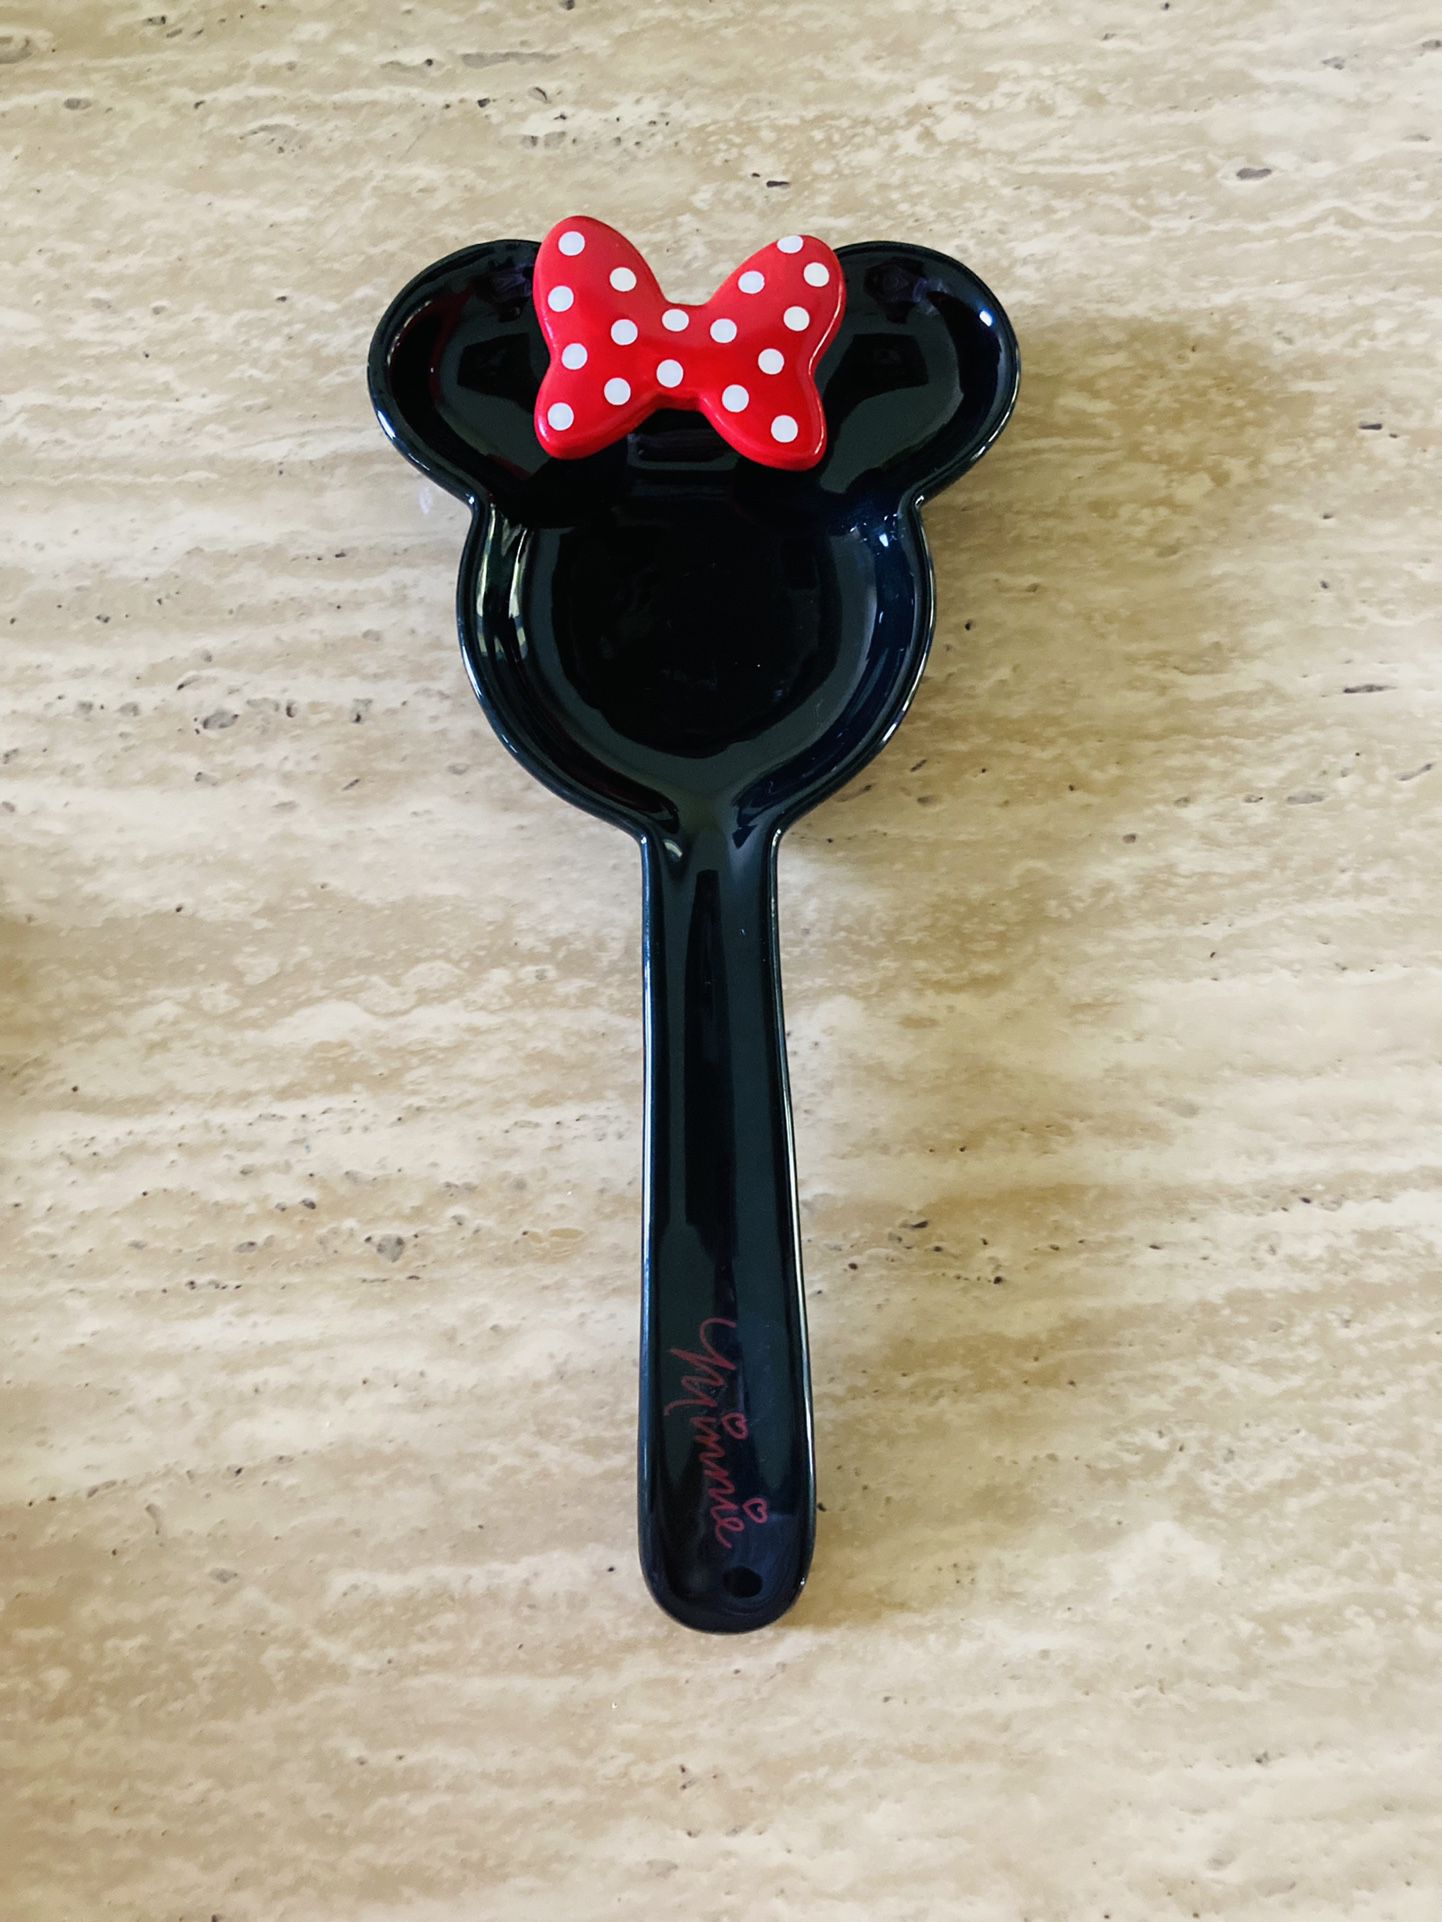  Disney Minnie Mouse Figural Black/Red Spoon Rest